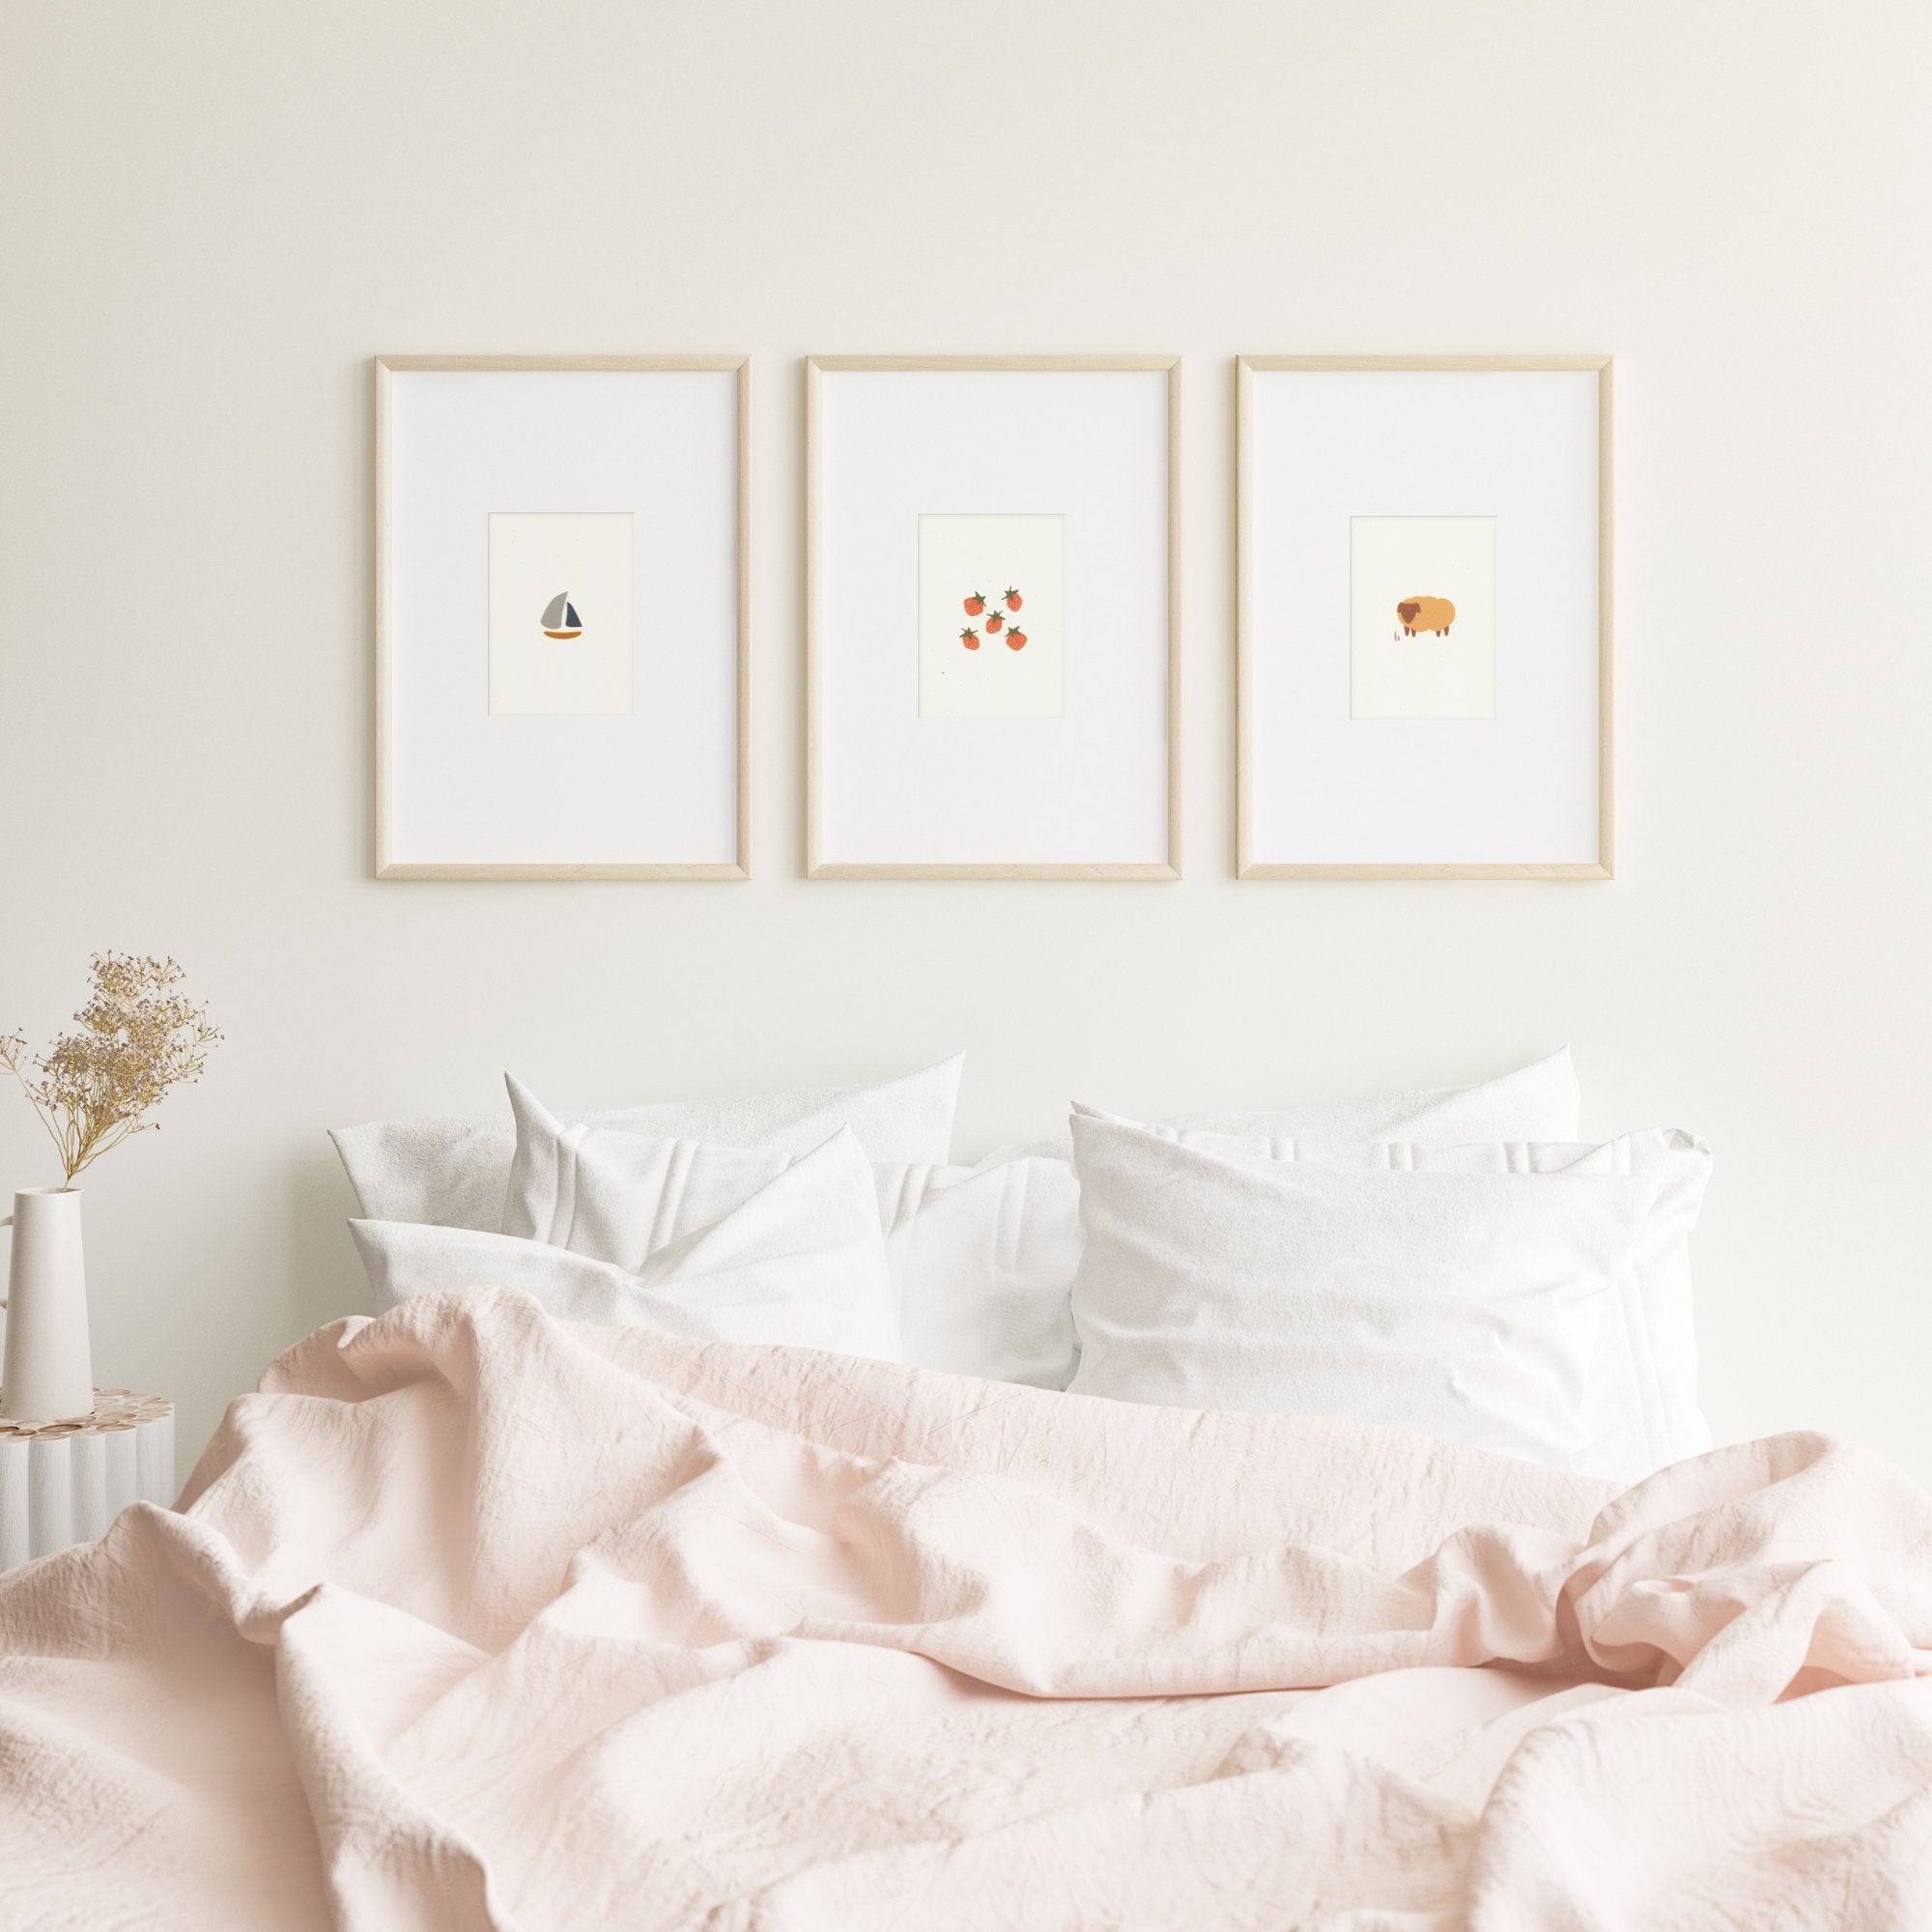 Three cute nursery prints framed and hanging on a wall over queen size bed. The prints show: a small sailboat, five strawberries, and a brown sheep.